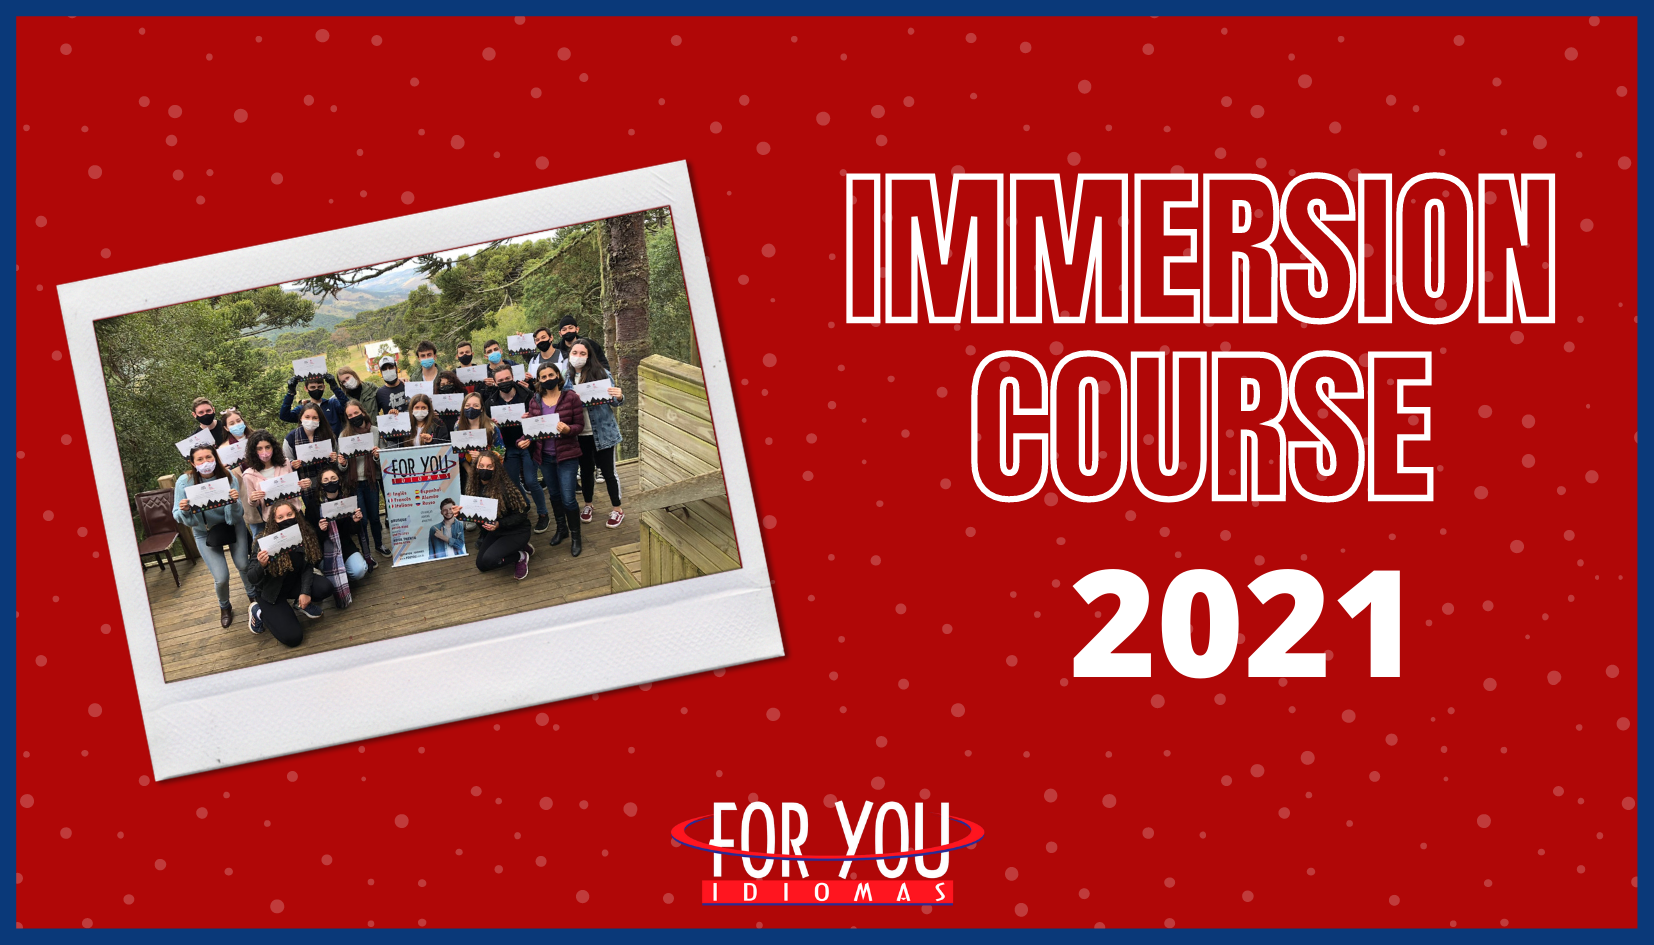 Immersion Course 2021